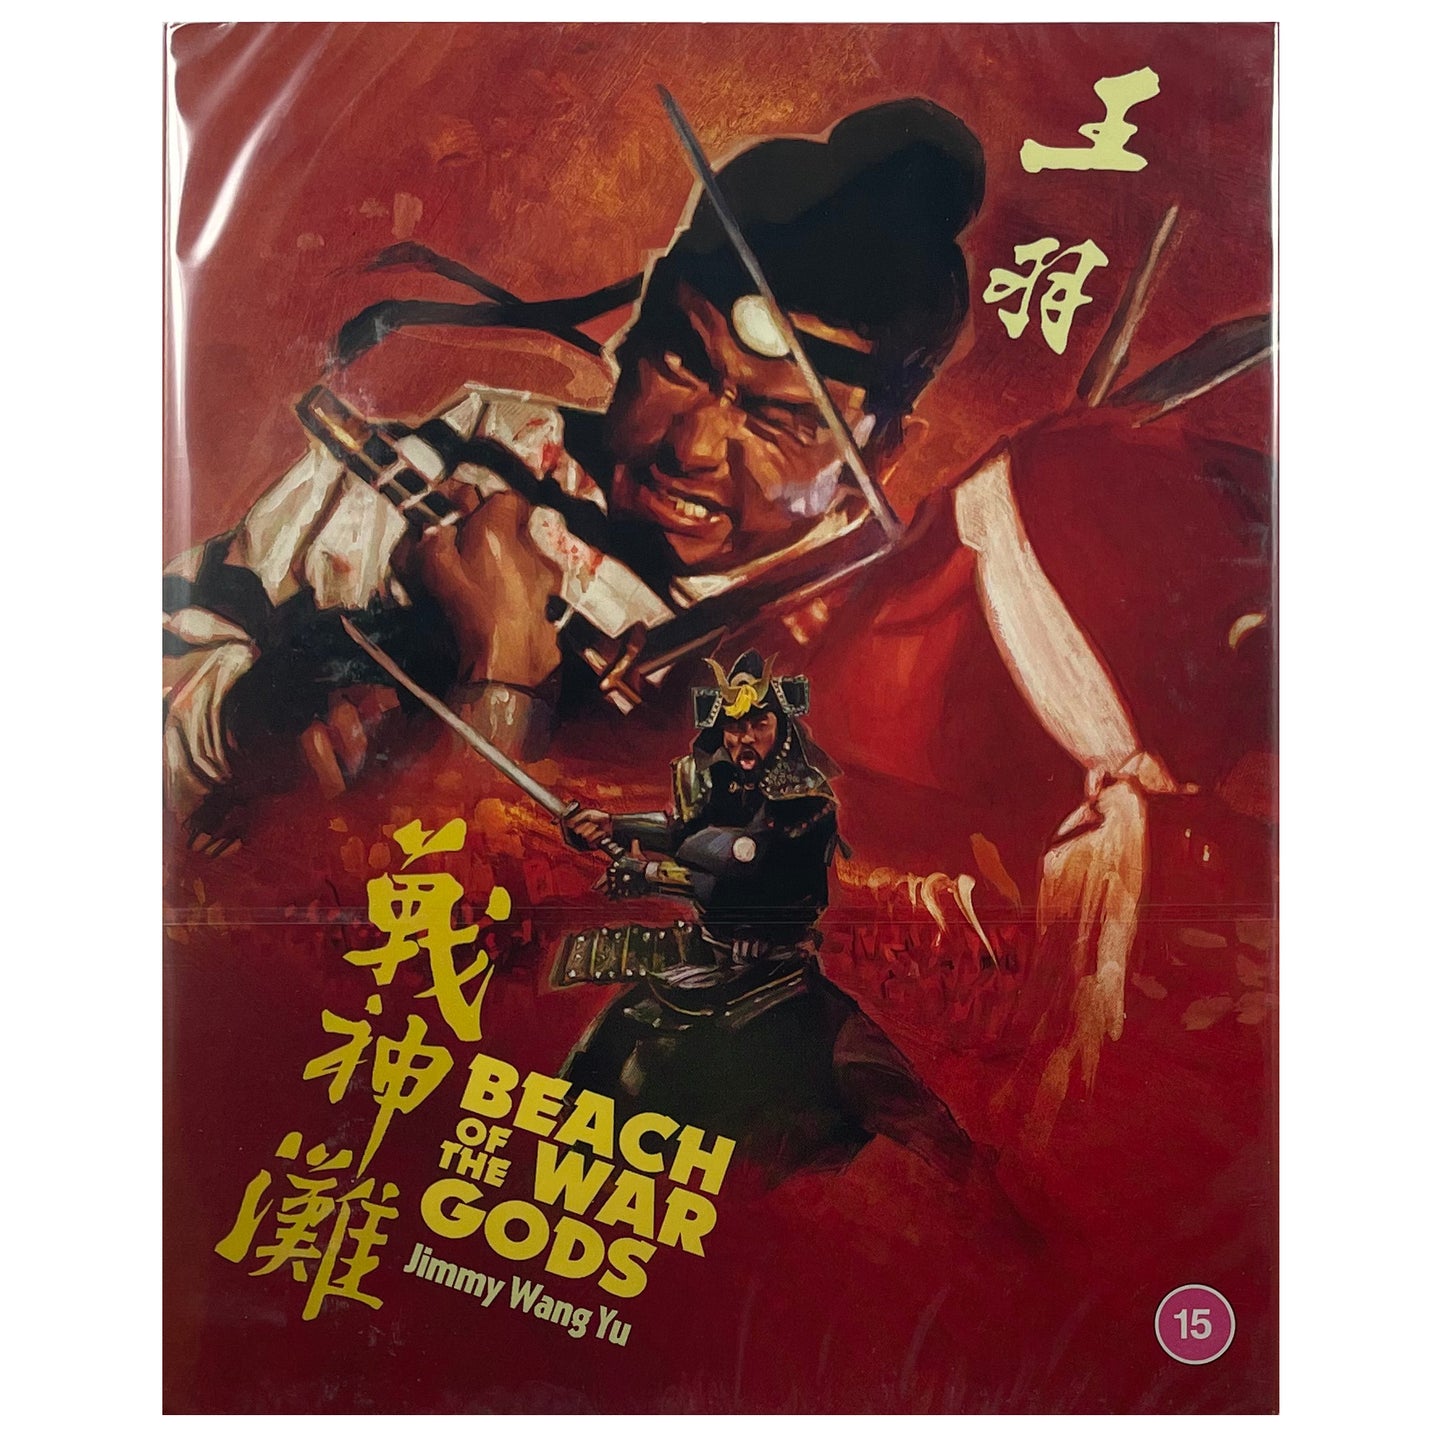 Beach of the War Gods Blu-Ray - Limited Edition